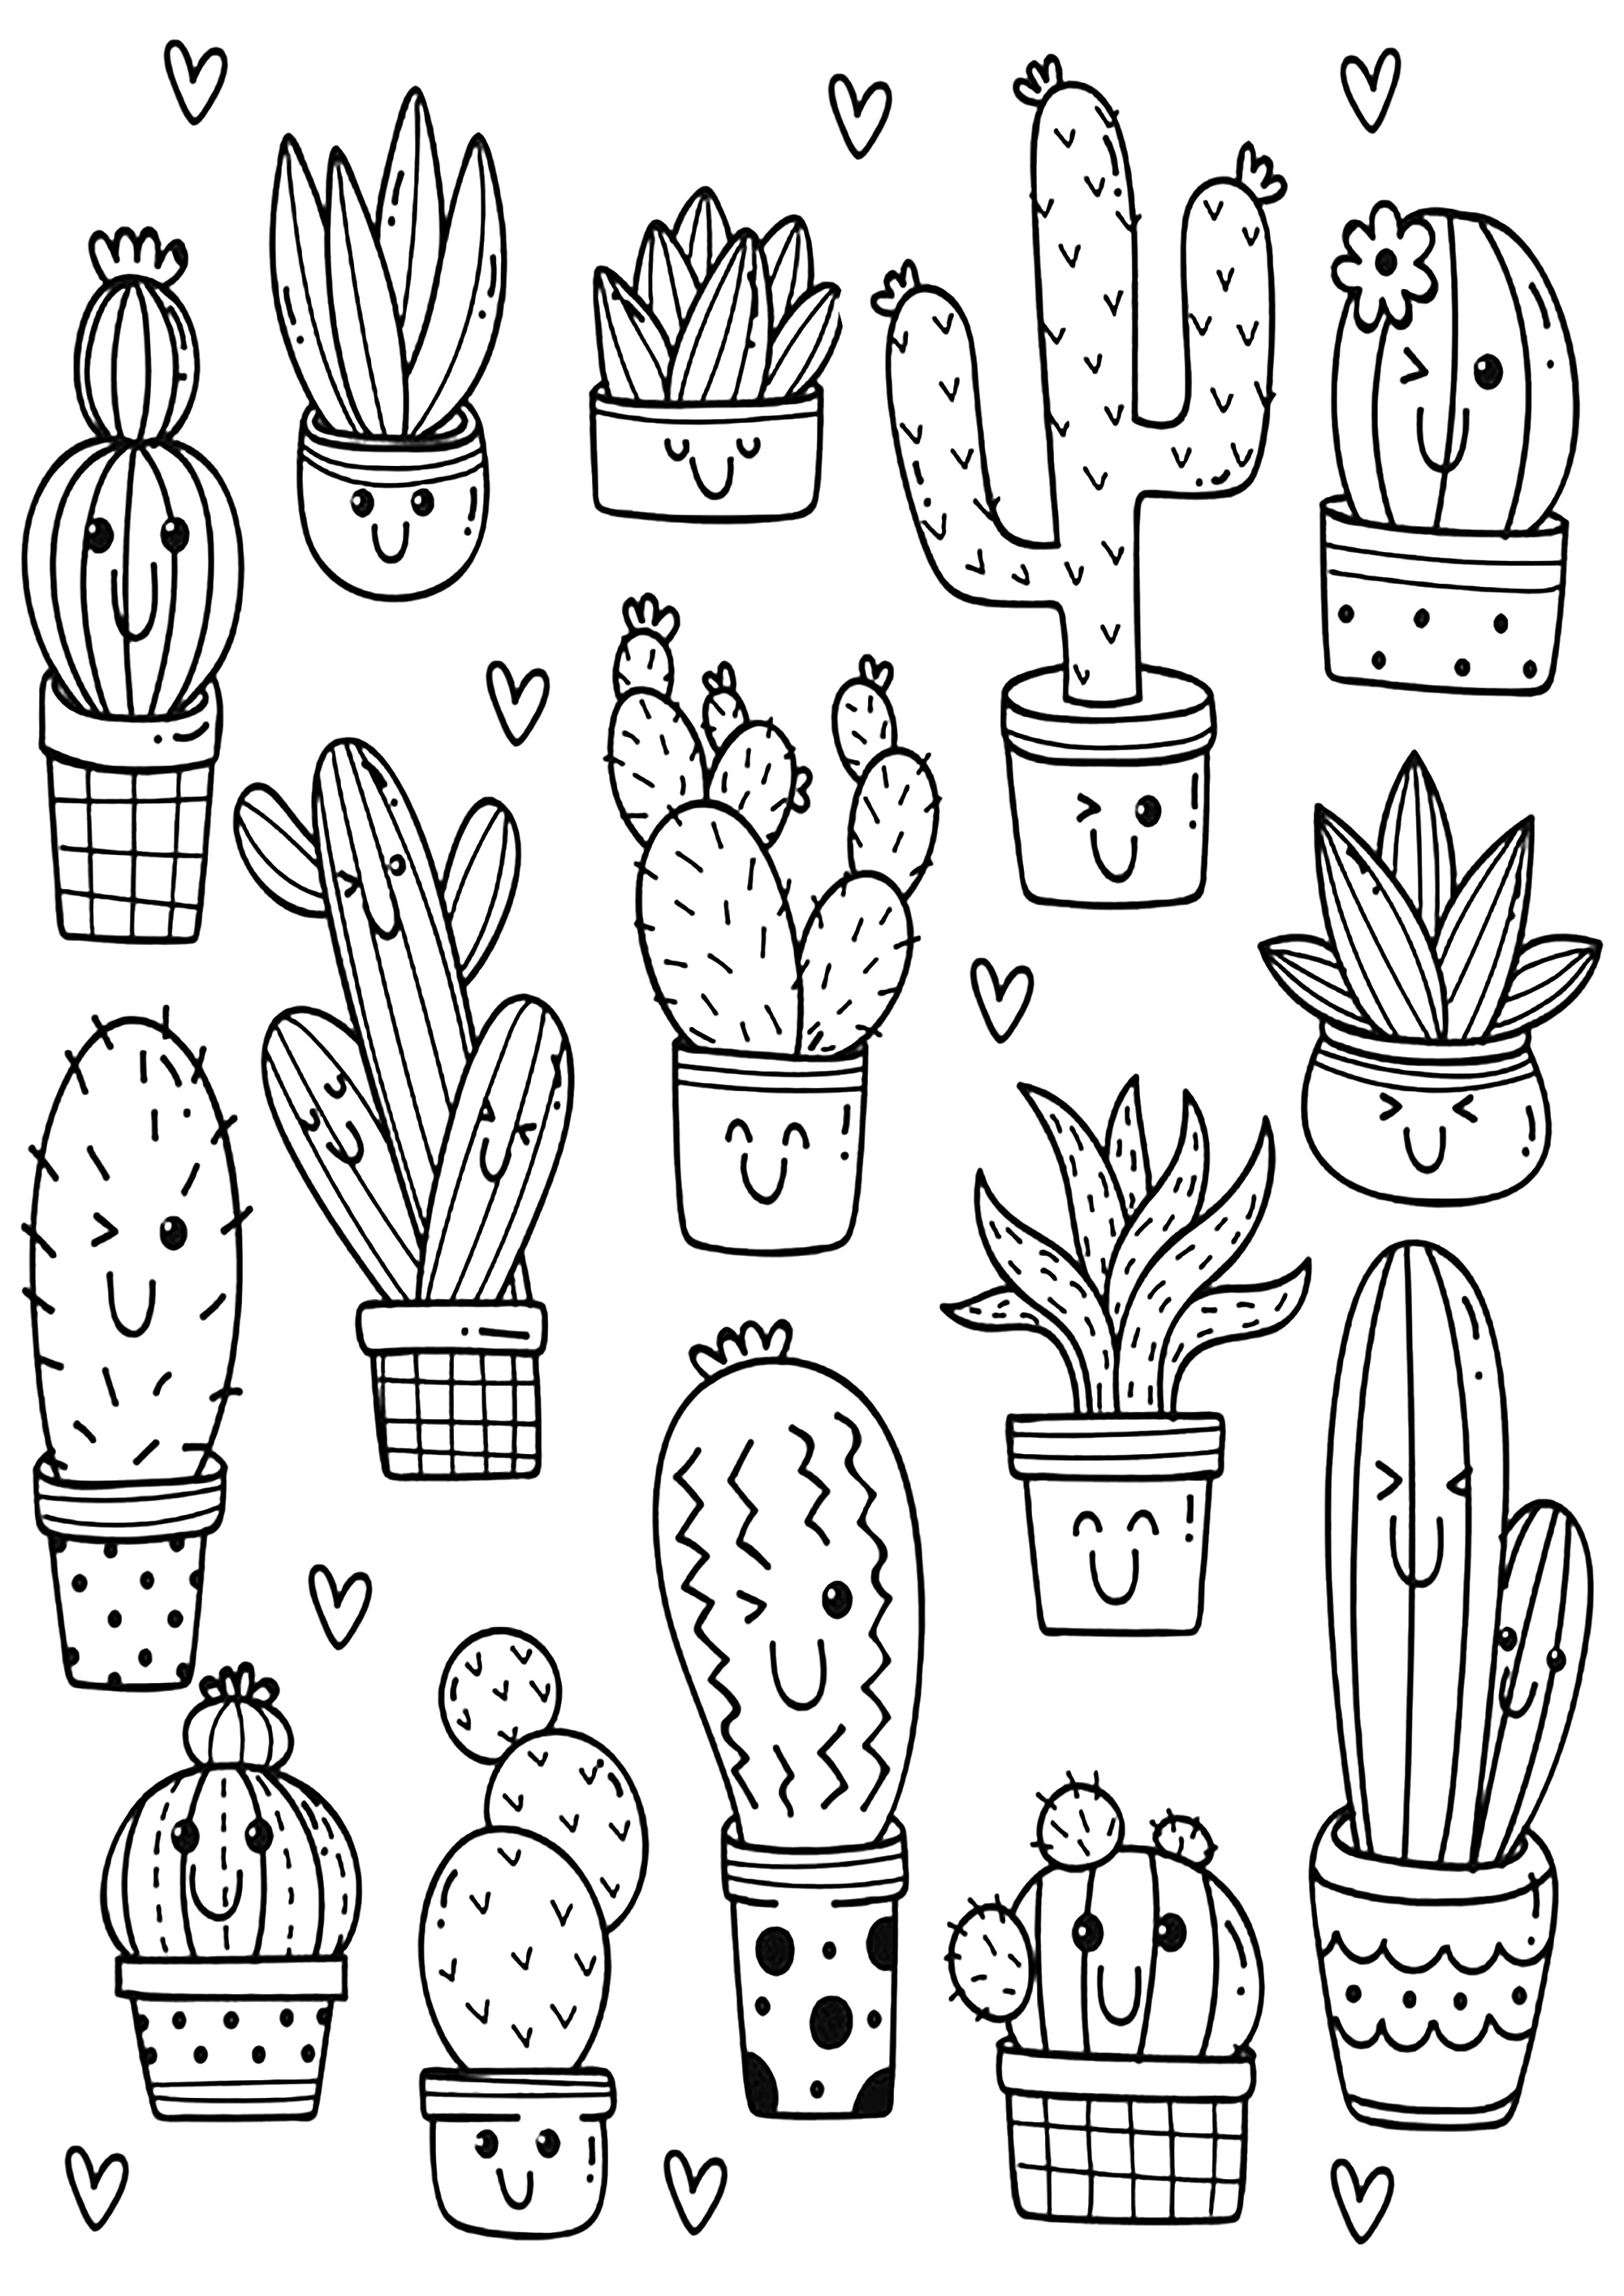 Coloring page : Flowers